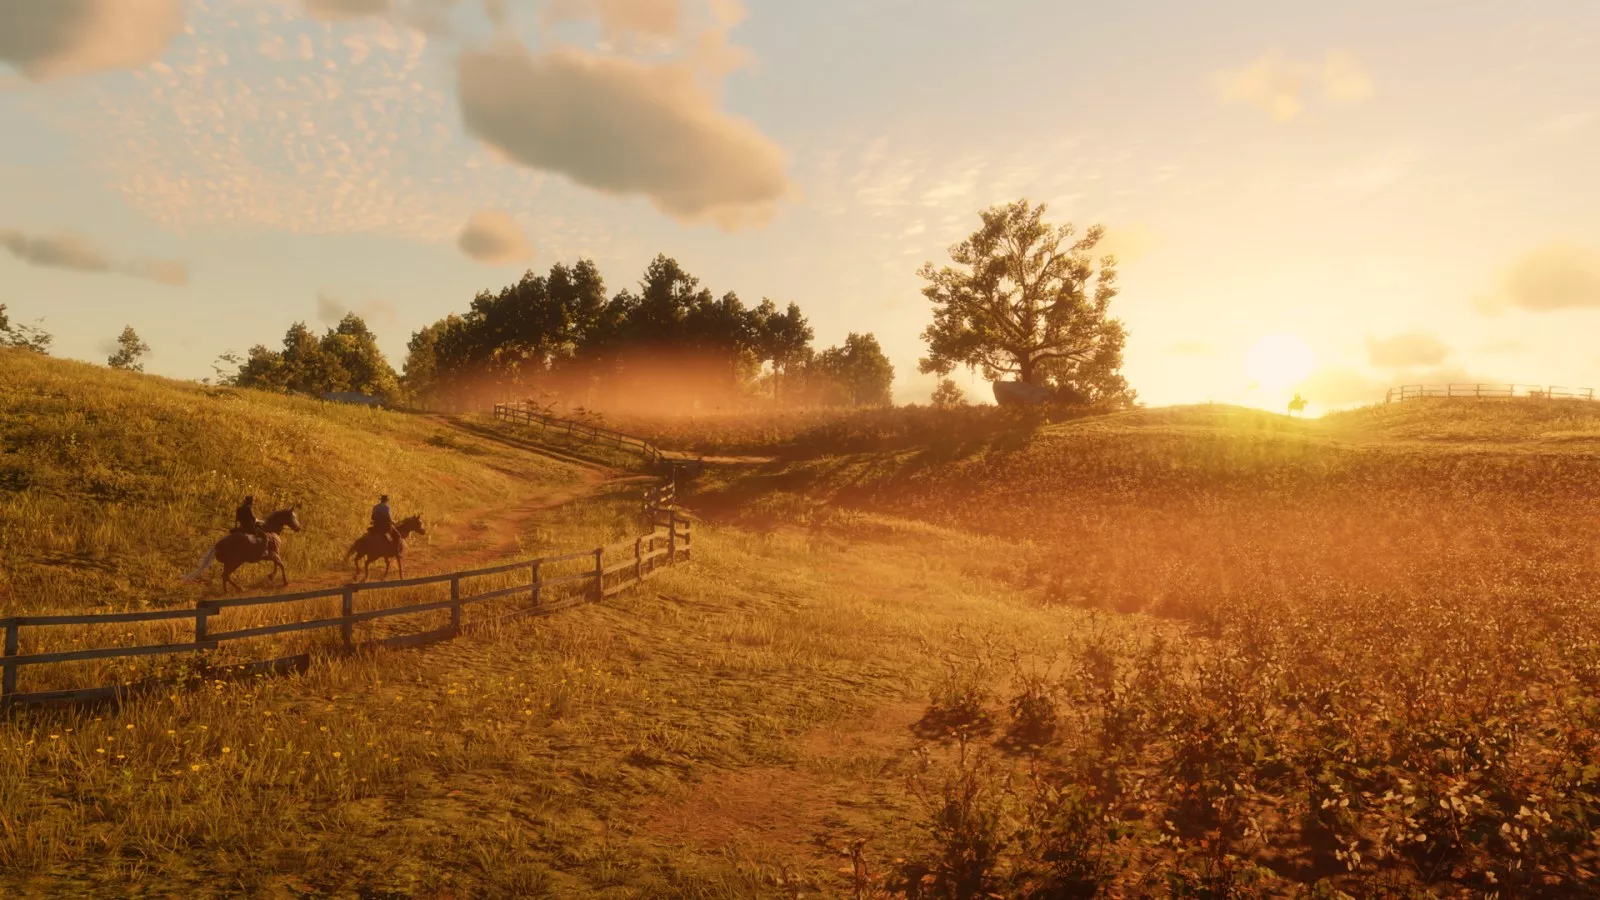 Red Dead Redemption 2 PC Release Date: Is it Coming to PC